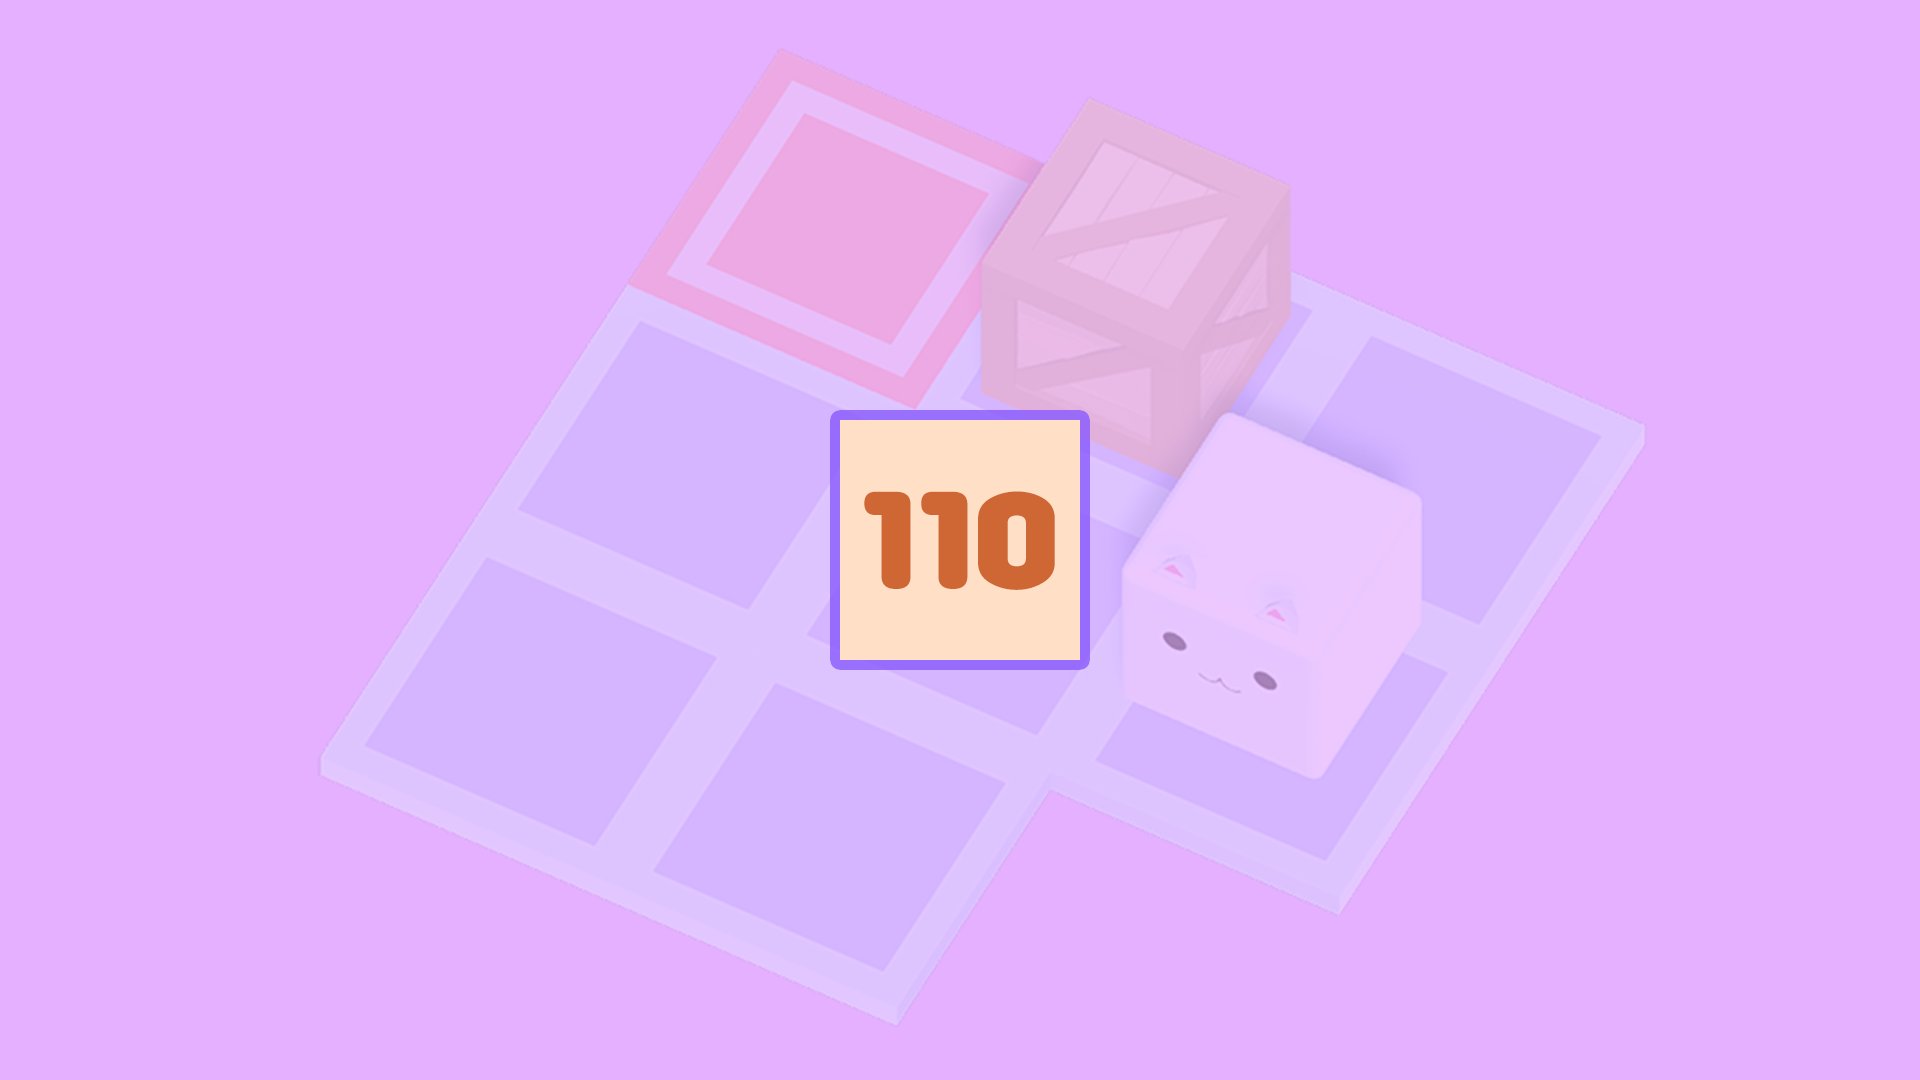 Icon for Level 110